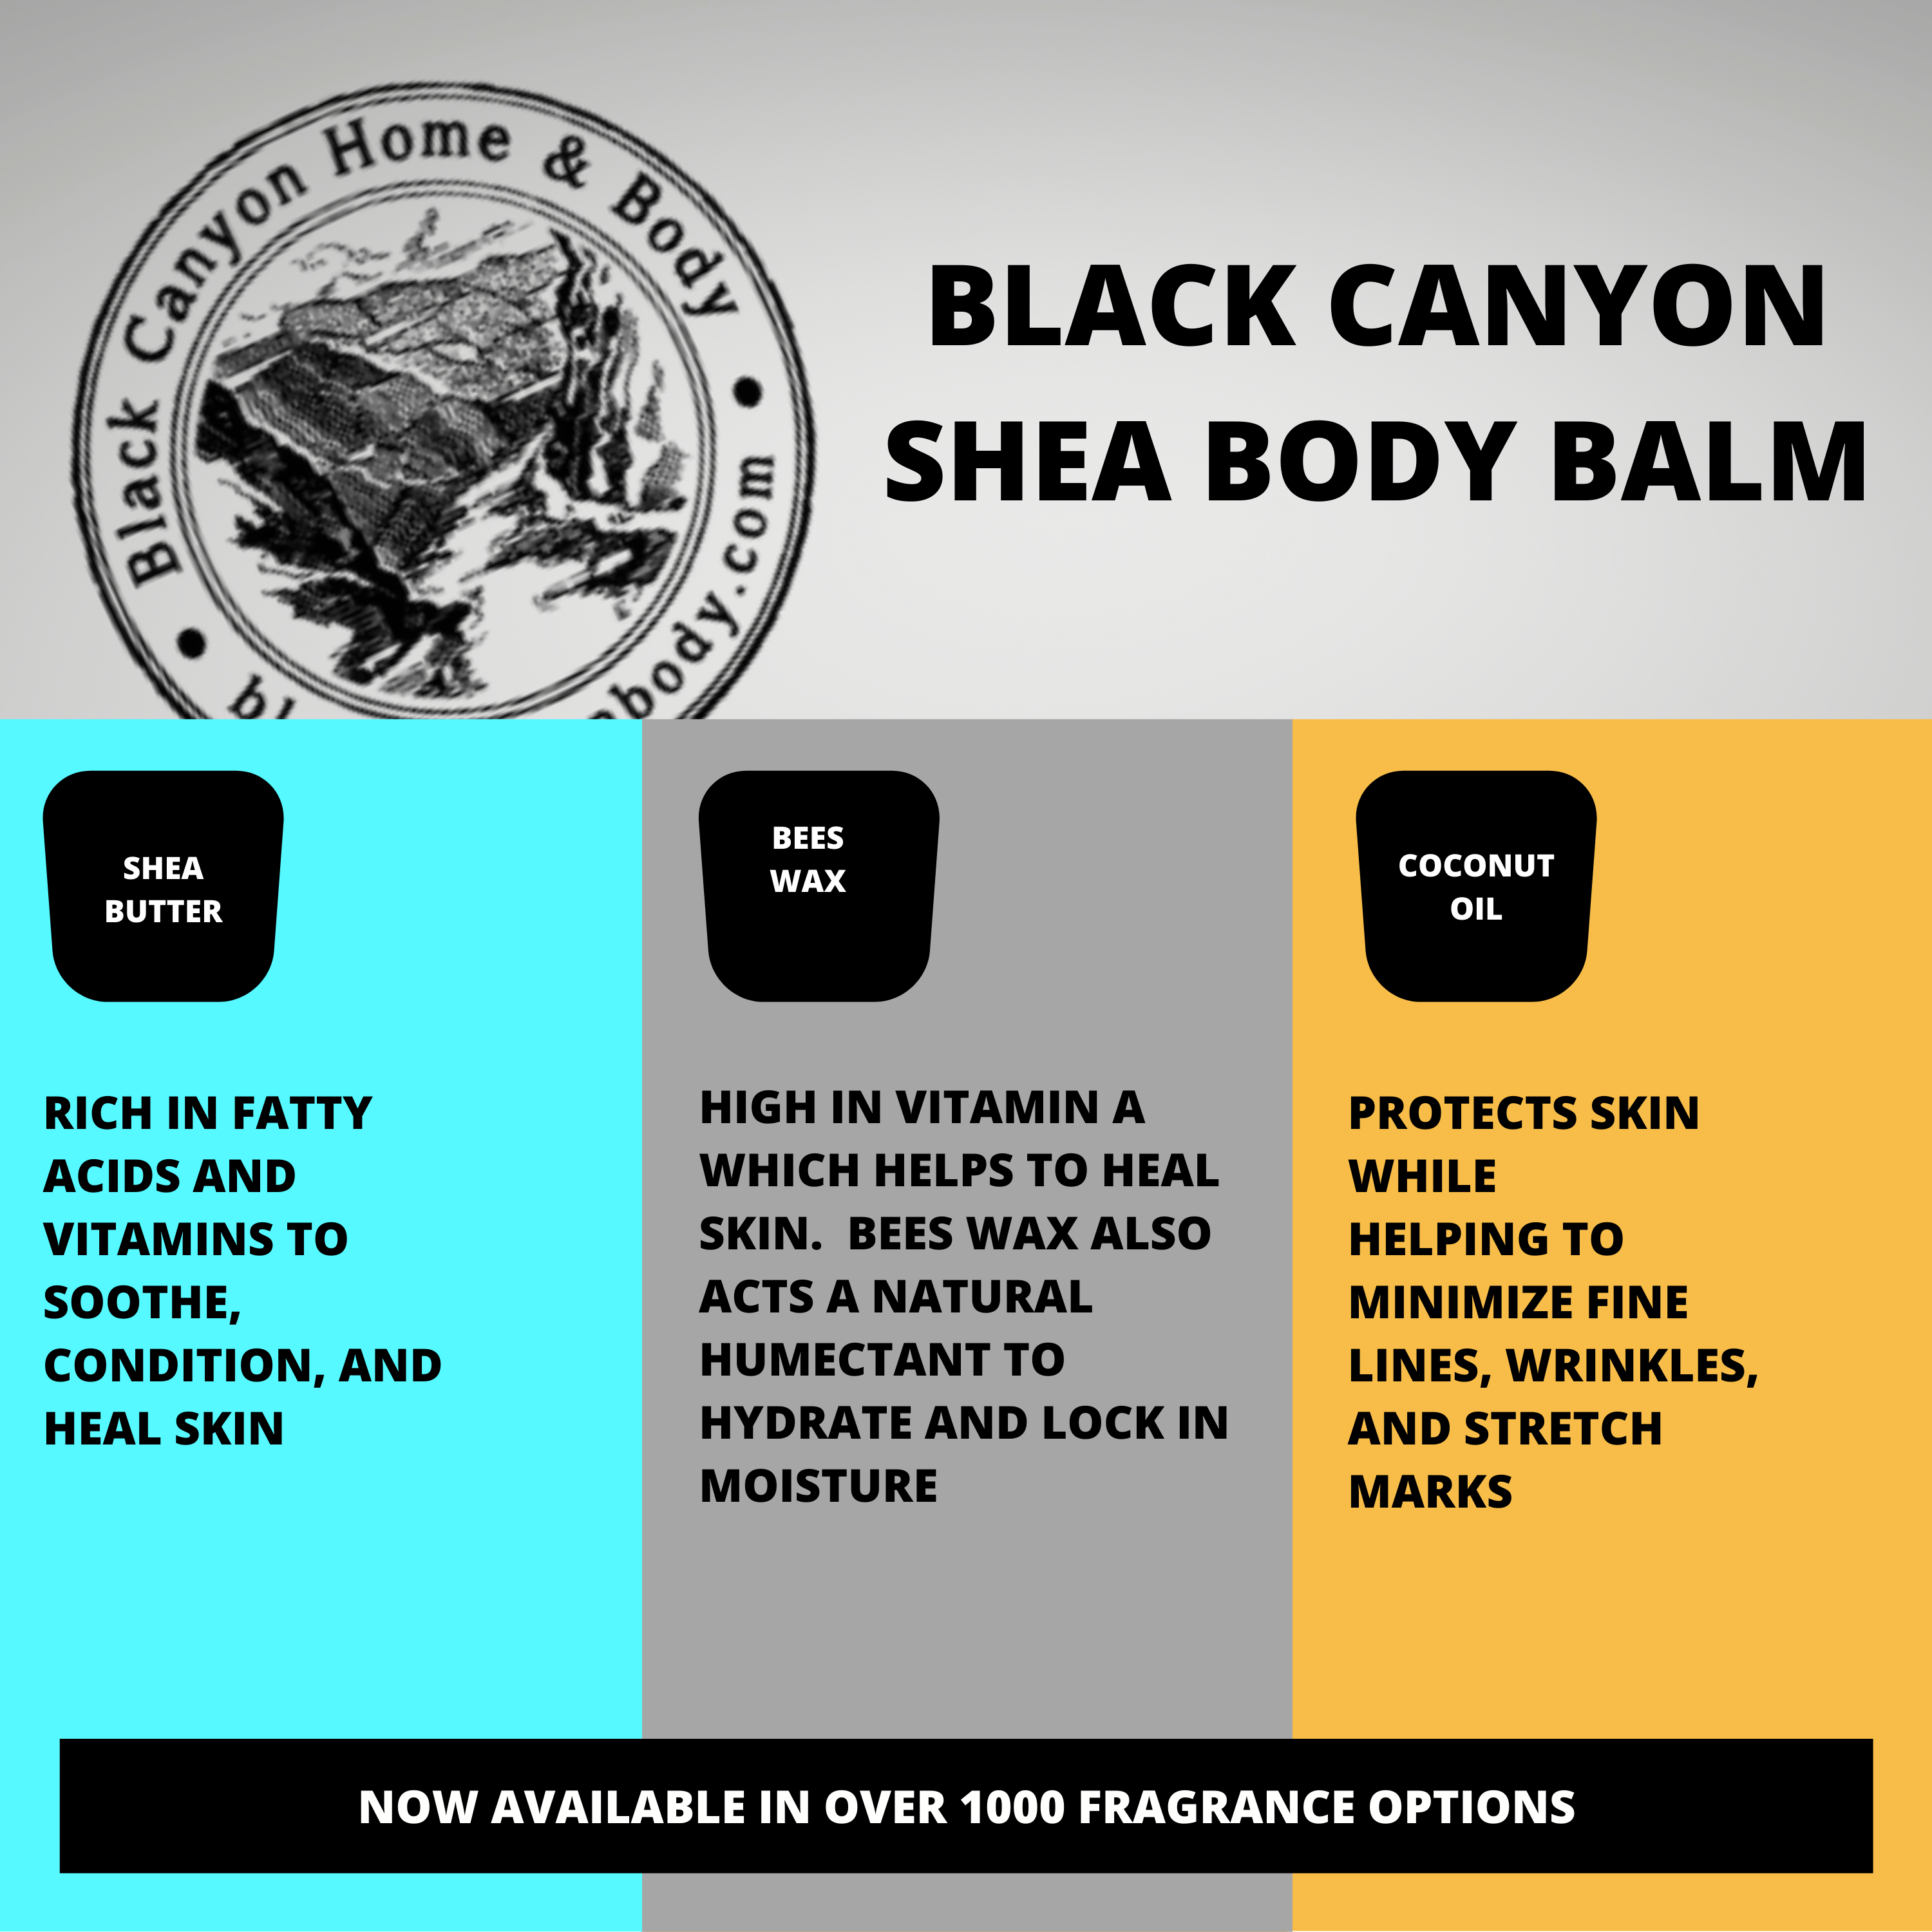 Black Canyon Black Currant & Rose Scented Natural Body Balm with Shea